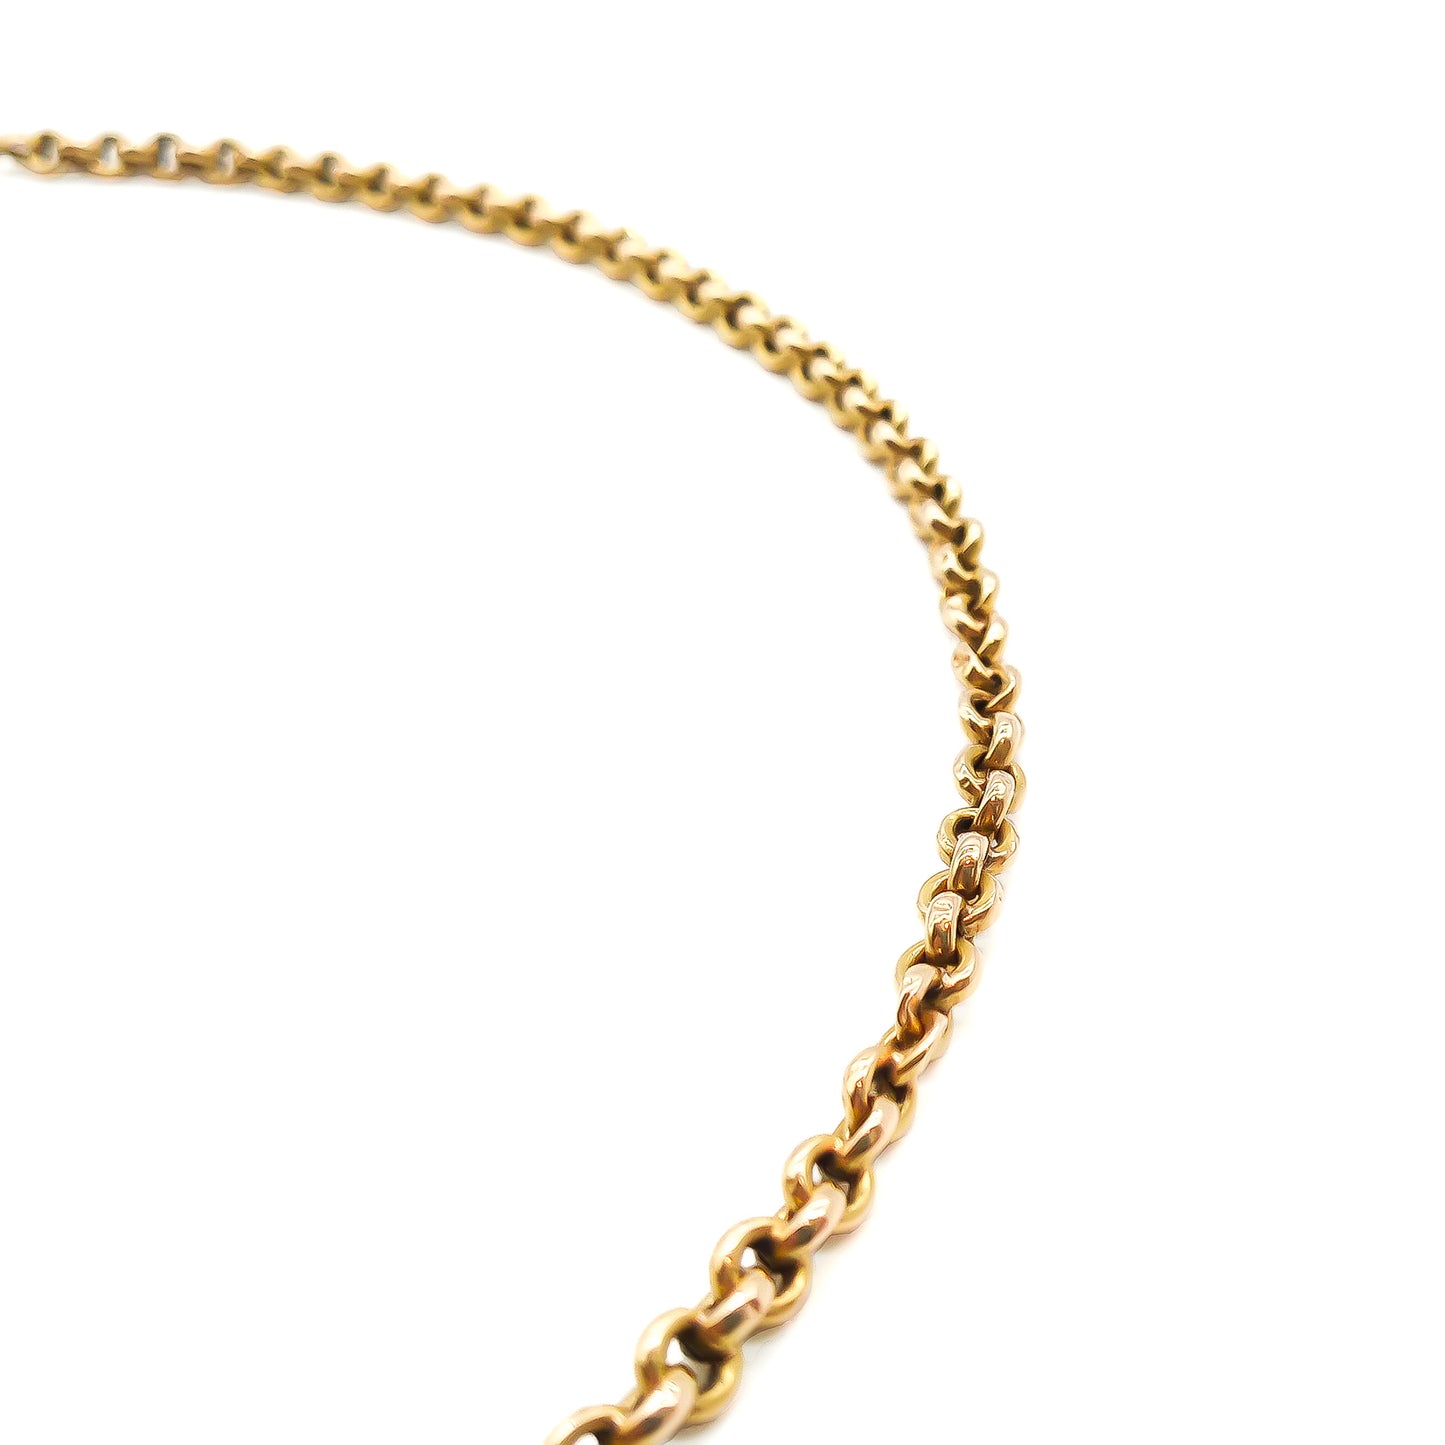 Classic Victorian 18ct rose gold belcher link chain.